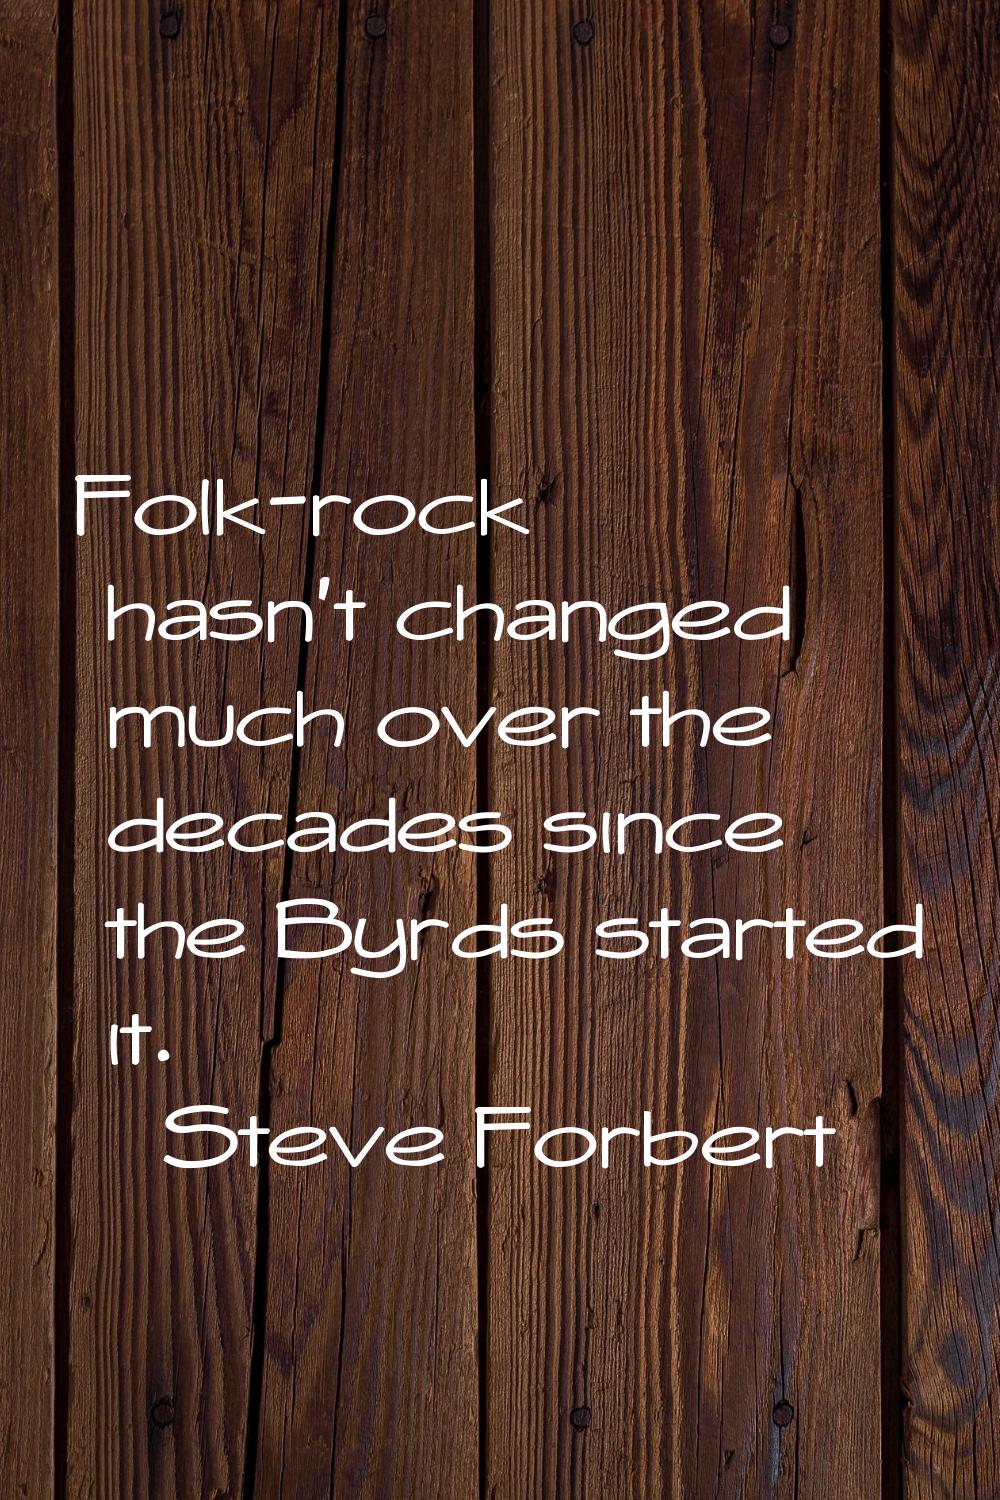 Folk-rock hasn't changed much over the decades since the Byrds started it.